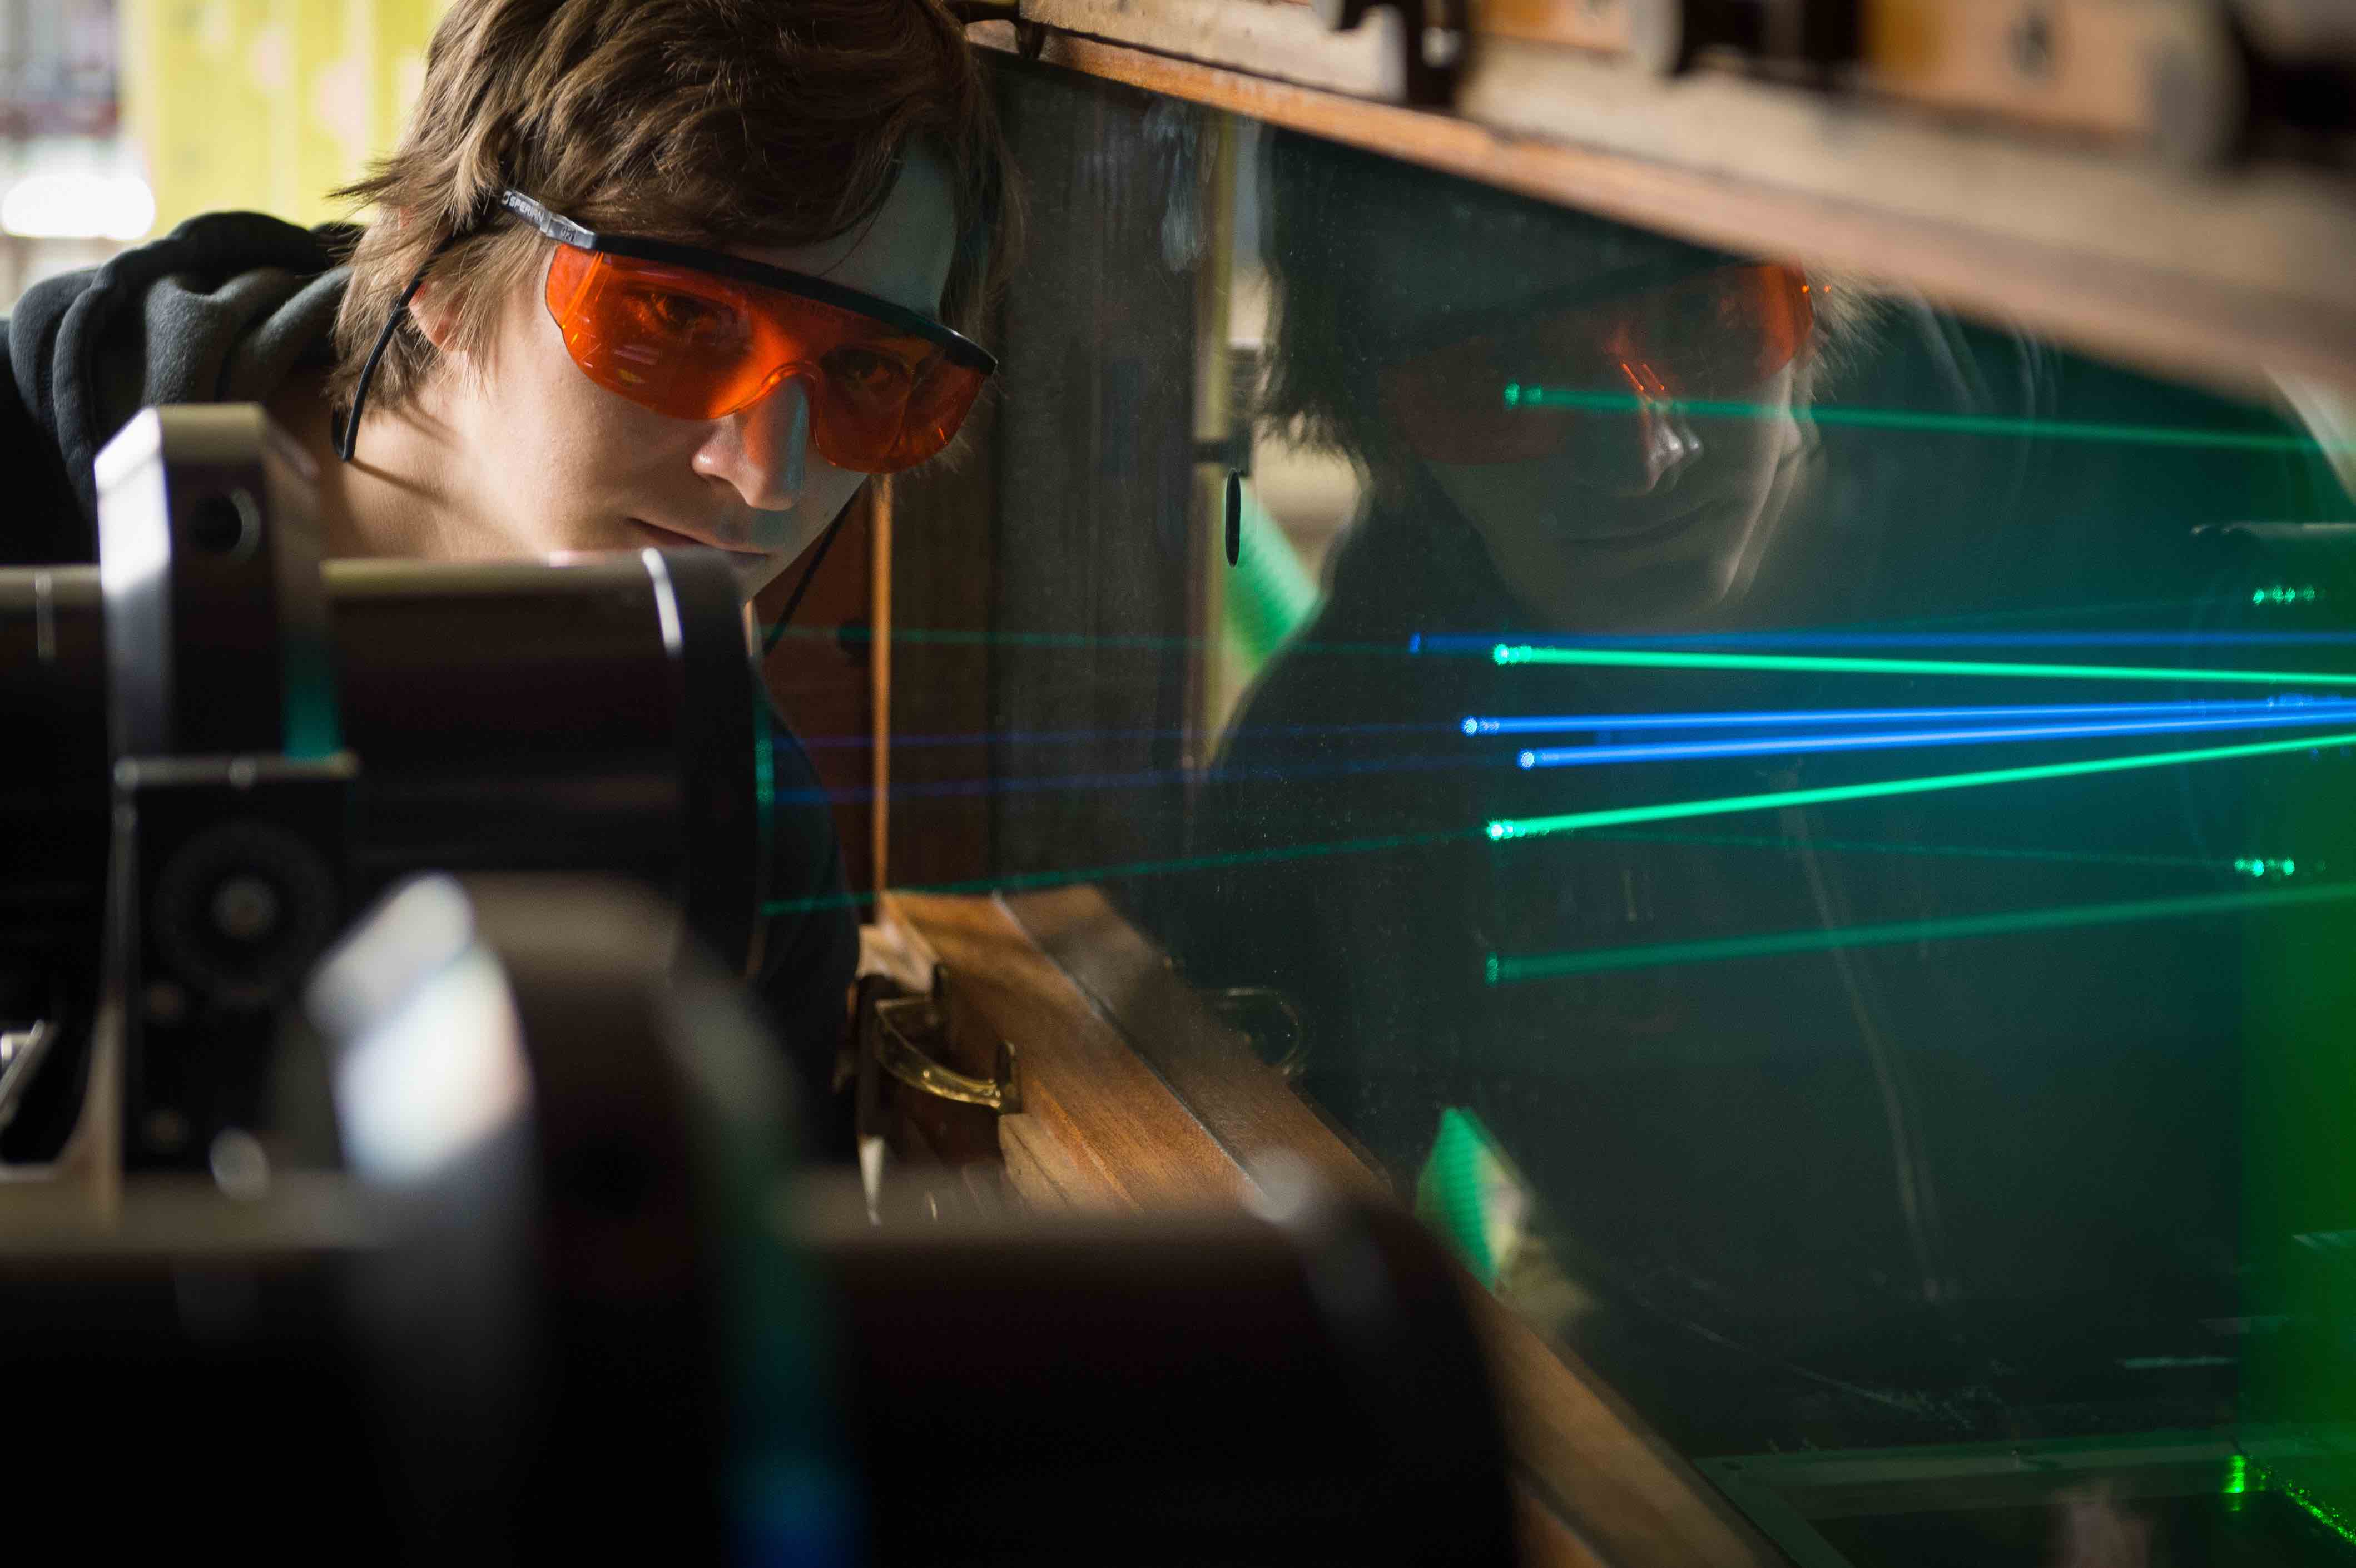 A student wearing orange glasses looking at lazers in the University of Bristol lab in Bristol, England. Photo credit: University of Bristol